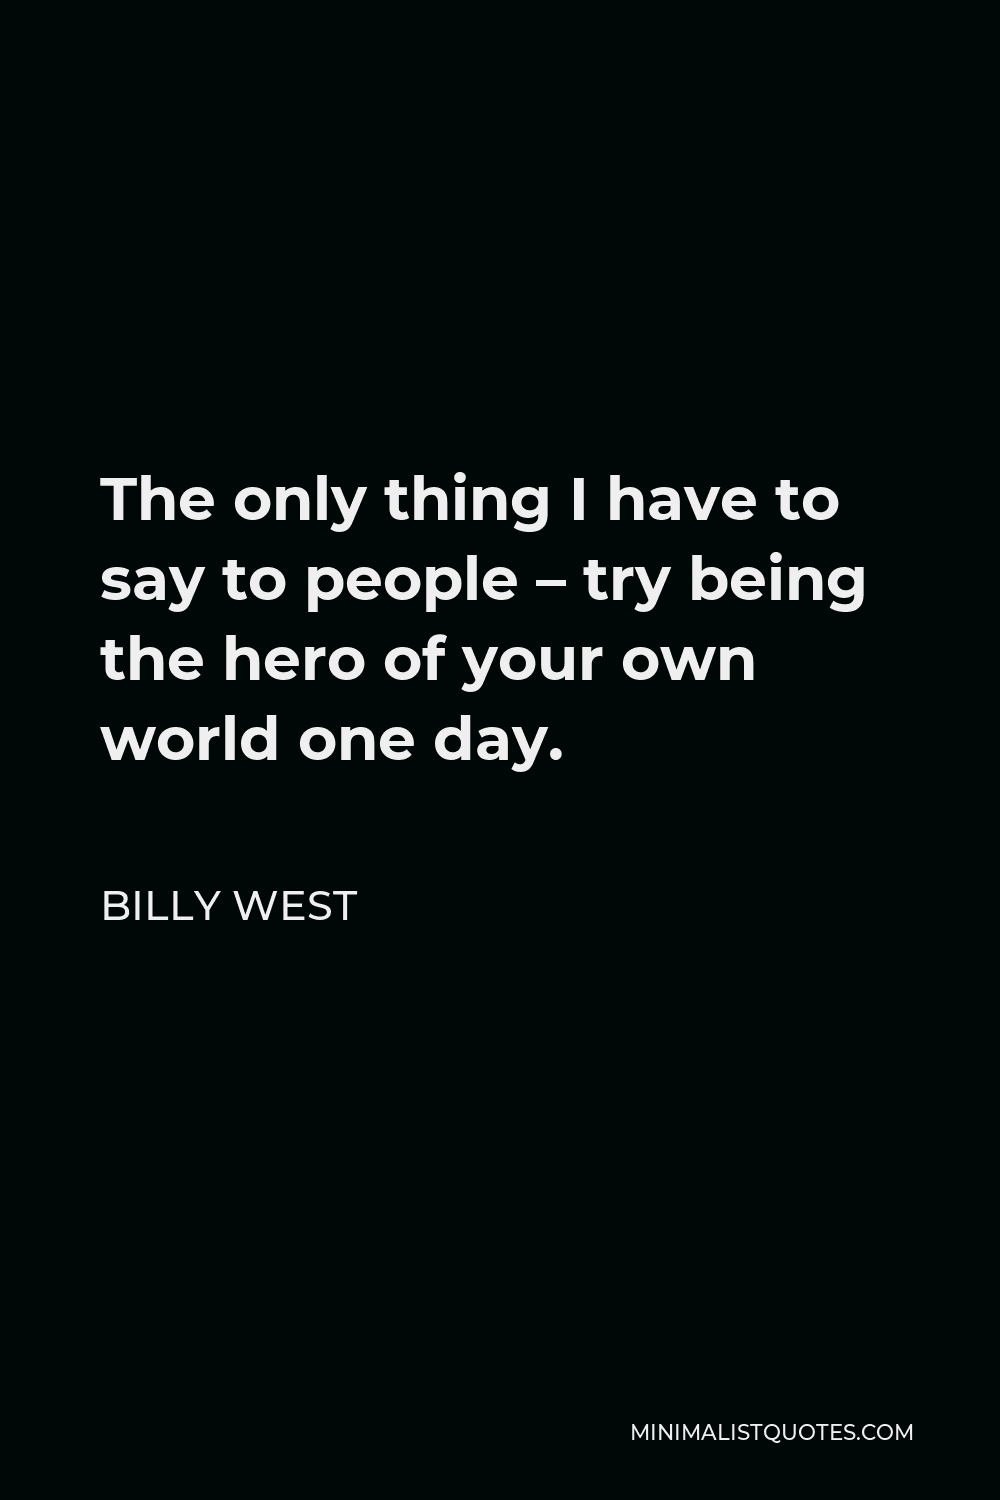 Billy West Quote - The only thing I have to say to people – try being the hero of your own world one day.